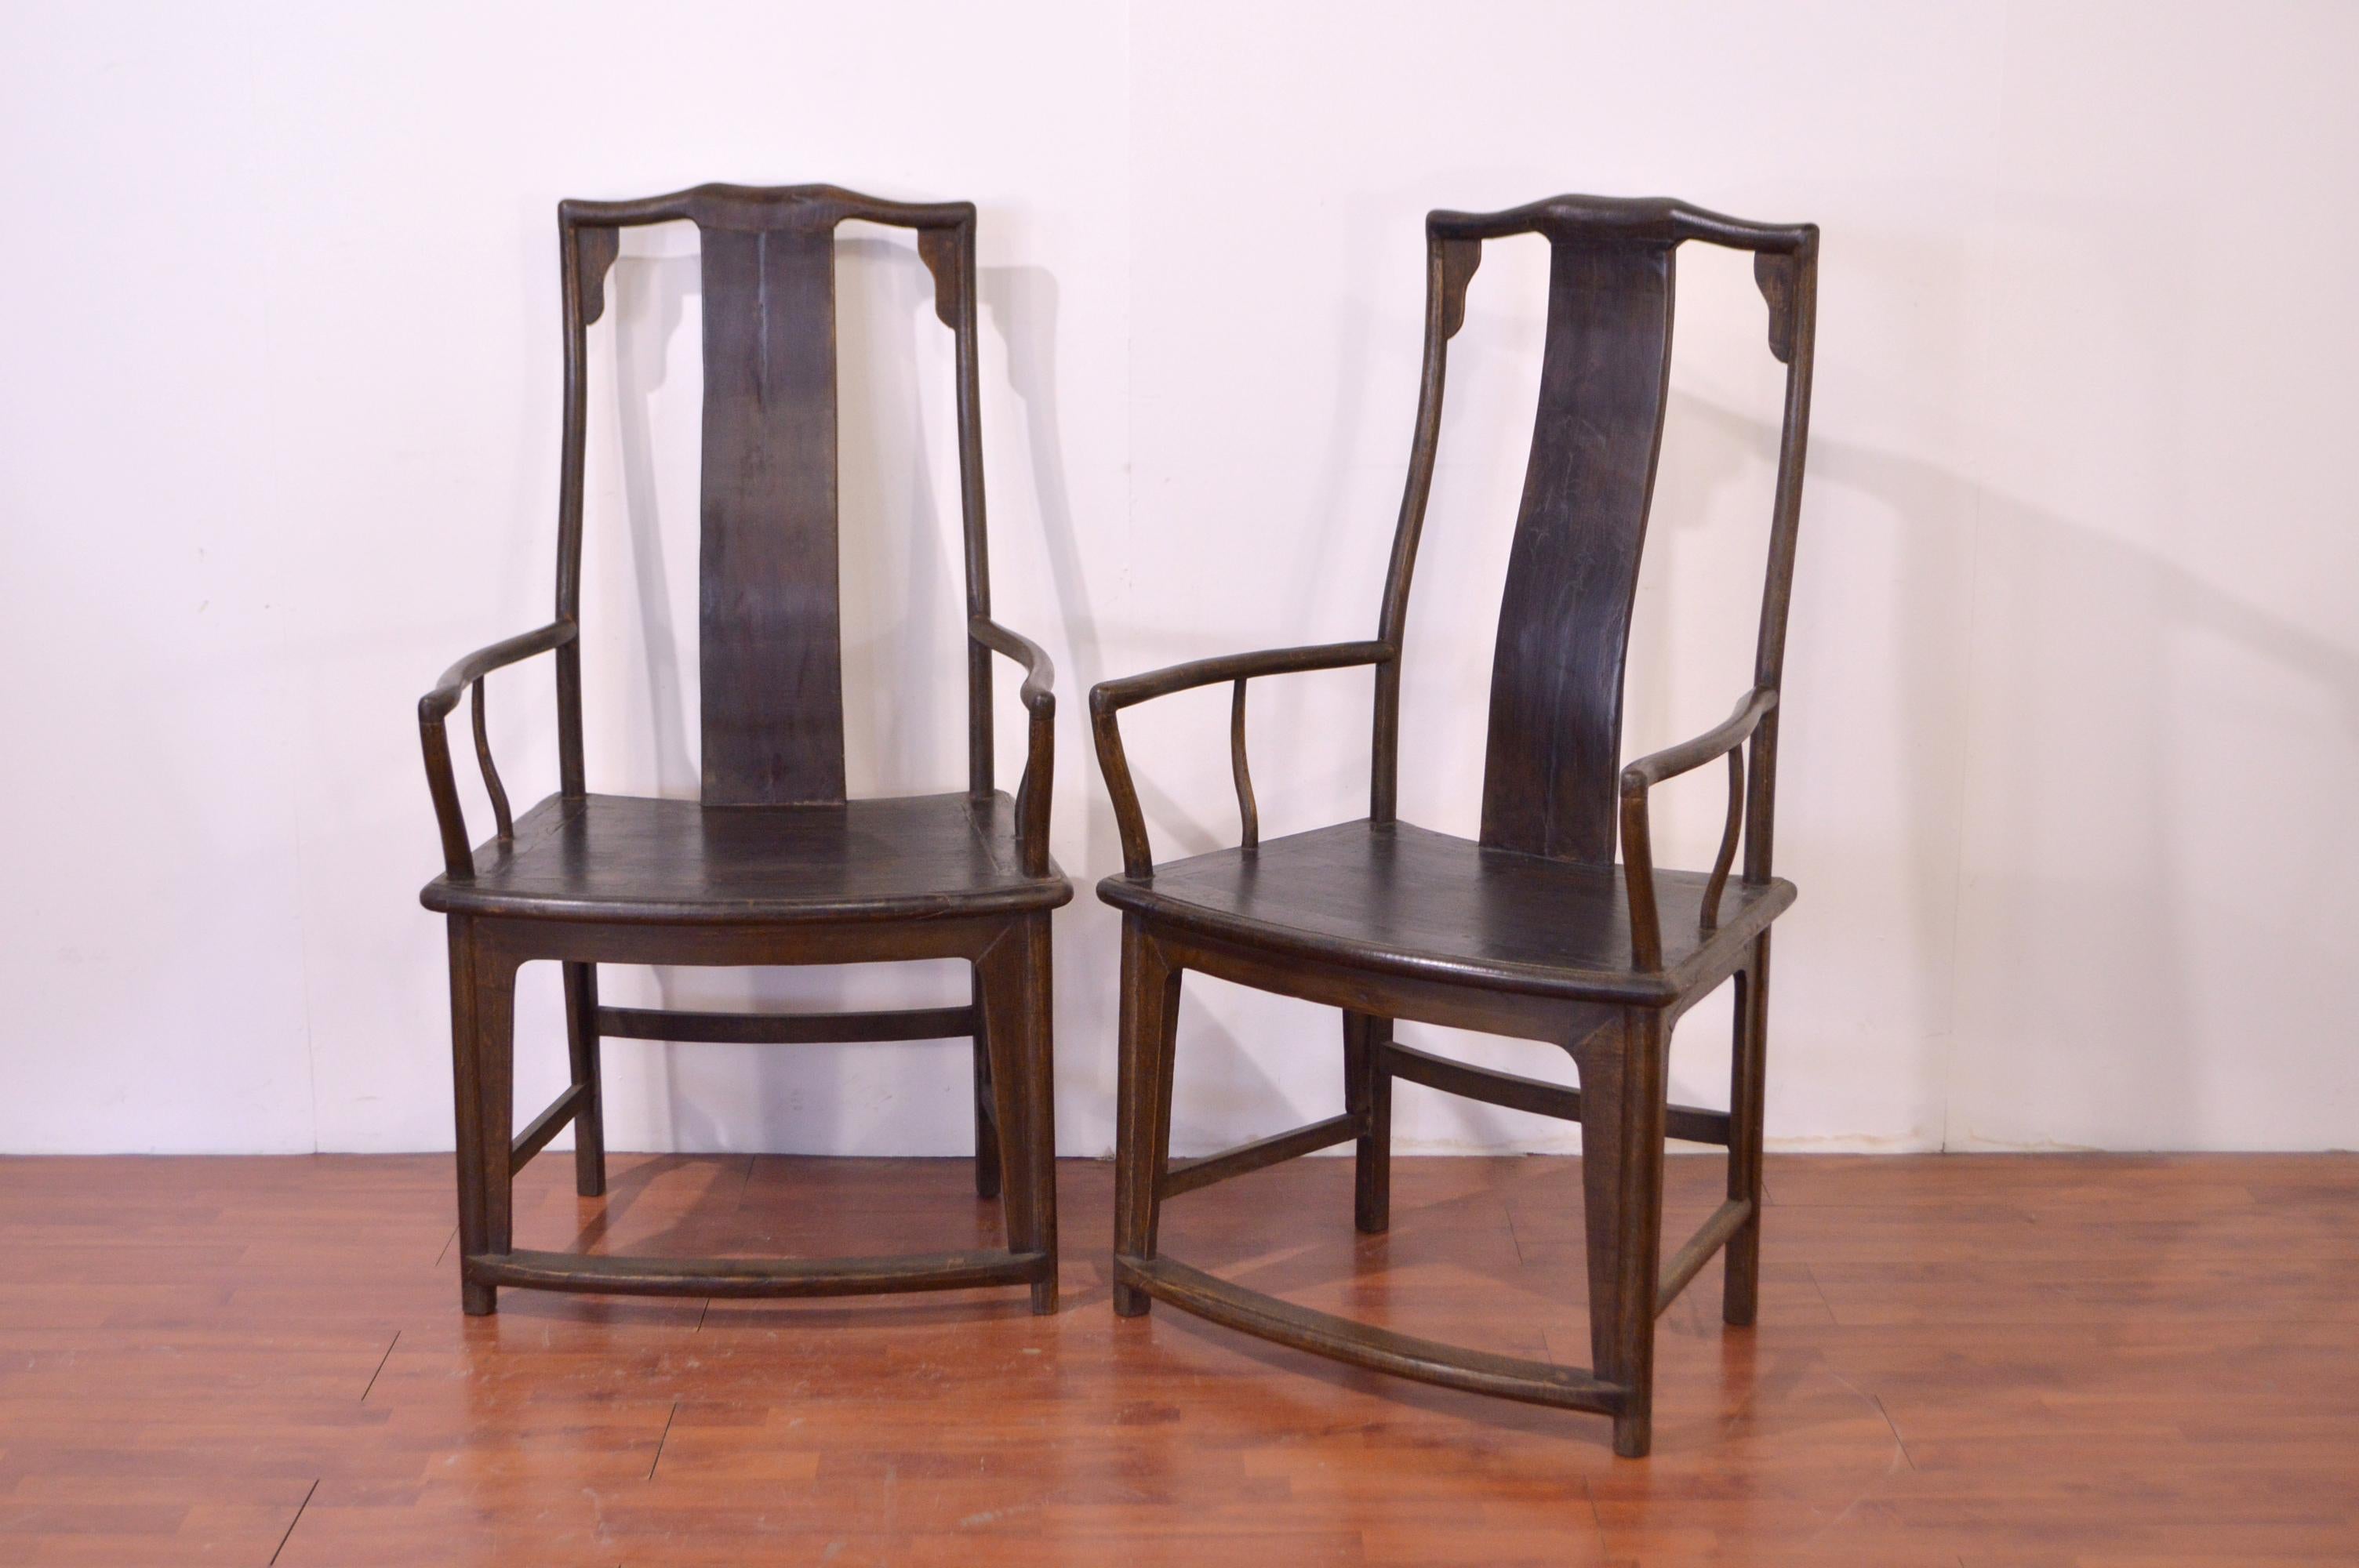 Elm wood chinese chairs of the province of Shaanxi. Simple form, very wide seat and armrests.